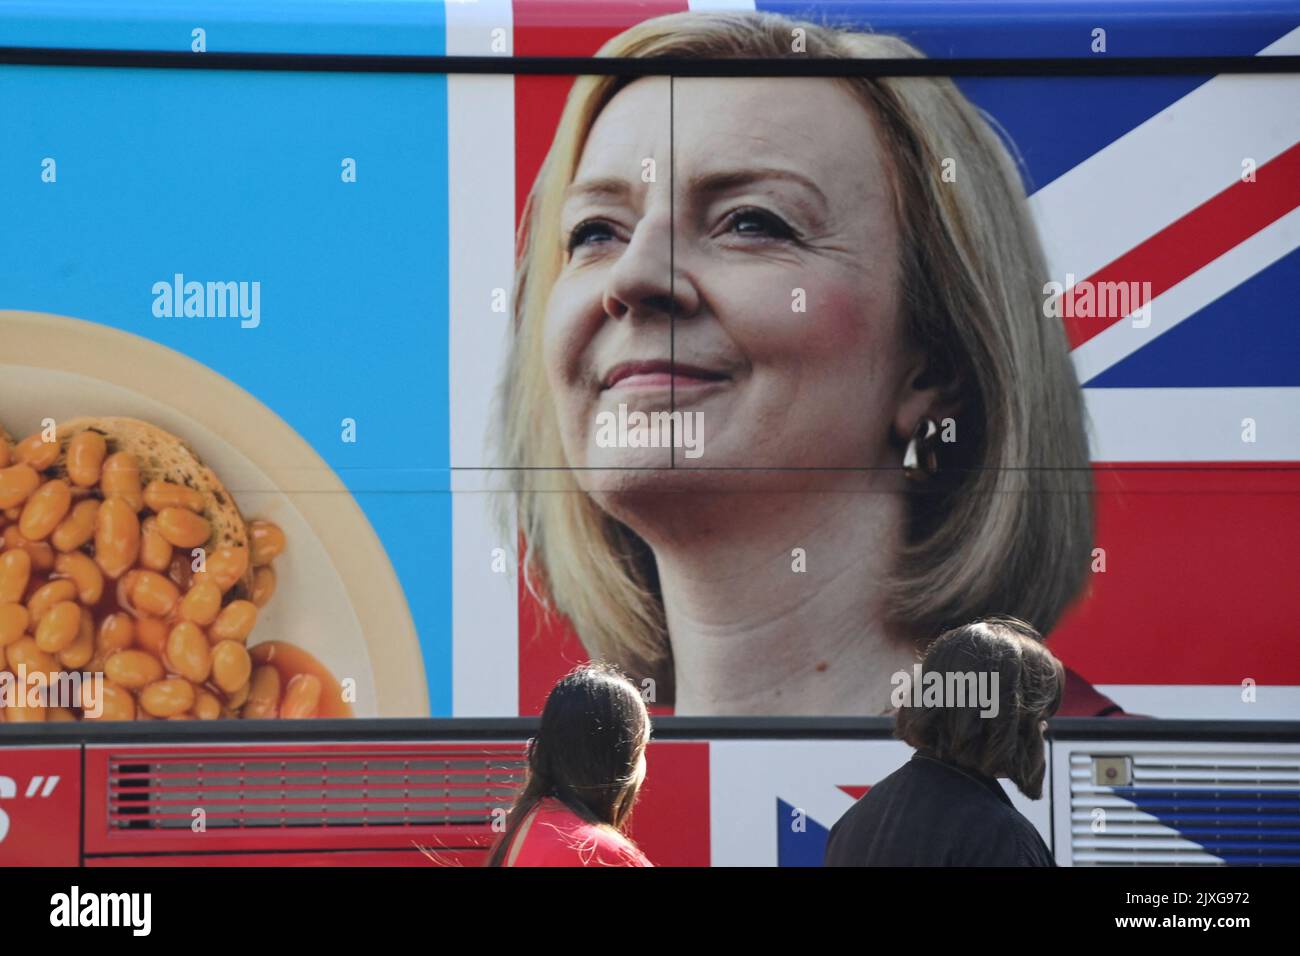 People walk past an image of new British Prime Minister Liz Truss on the side of a protest bus calling for a citizens assembly, parked in central London, Britain September 7, 2022. REUTERS/Toby Melville Stock Photo